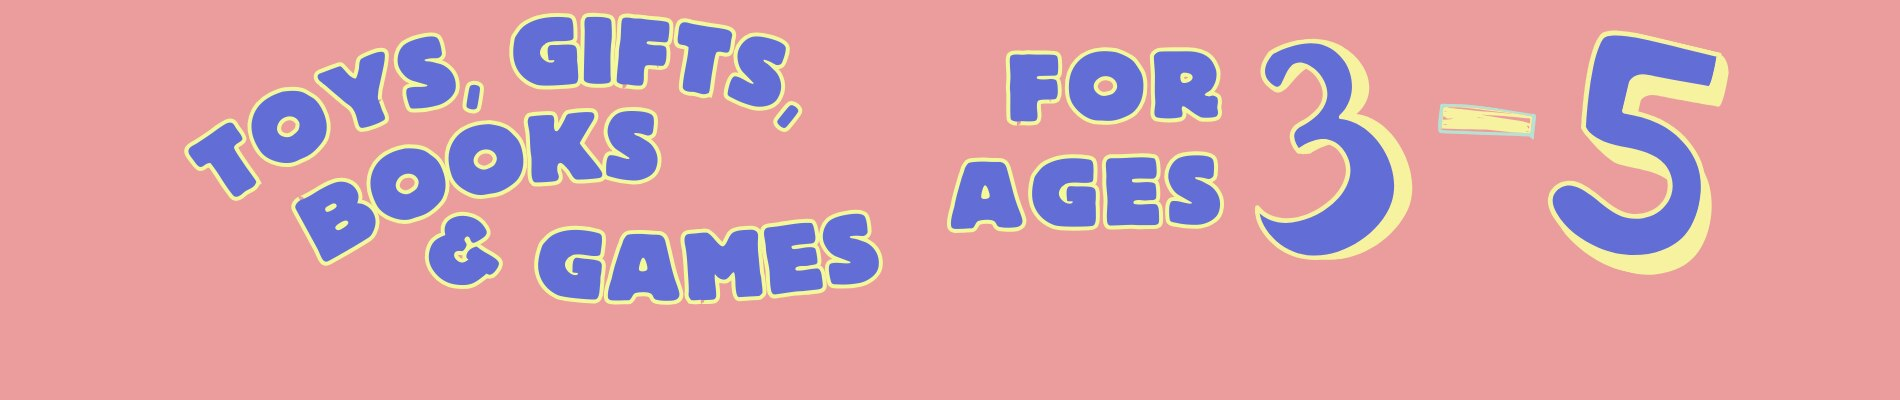 Text reads: "Toys, Gifts & games for ages 3-5"